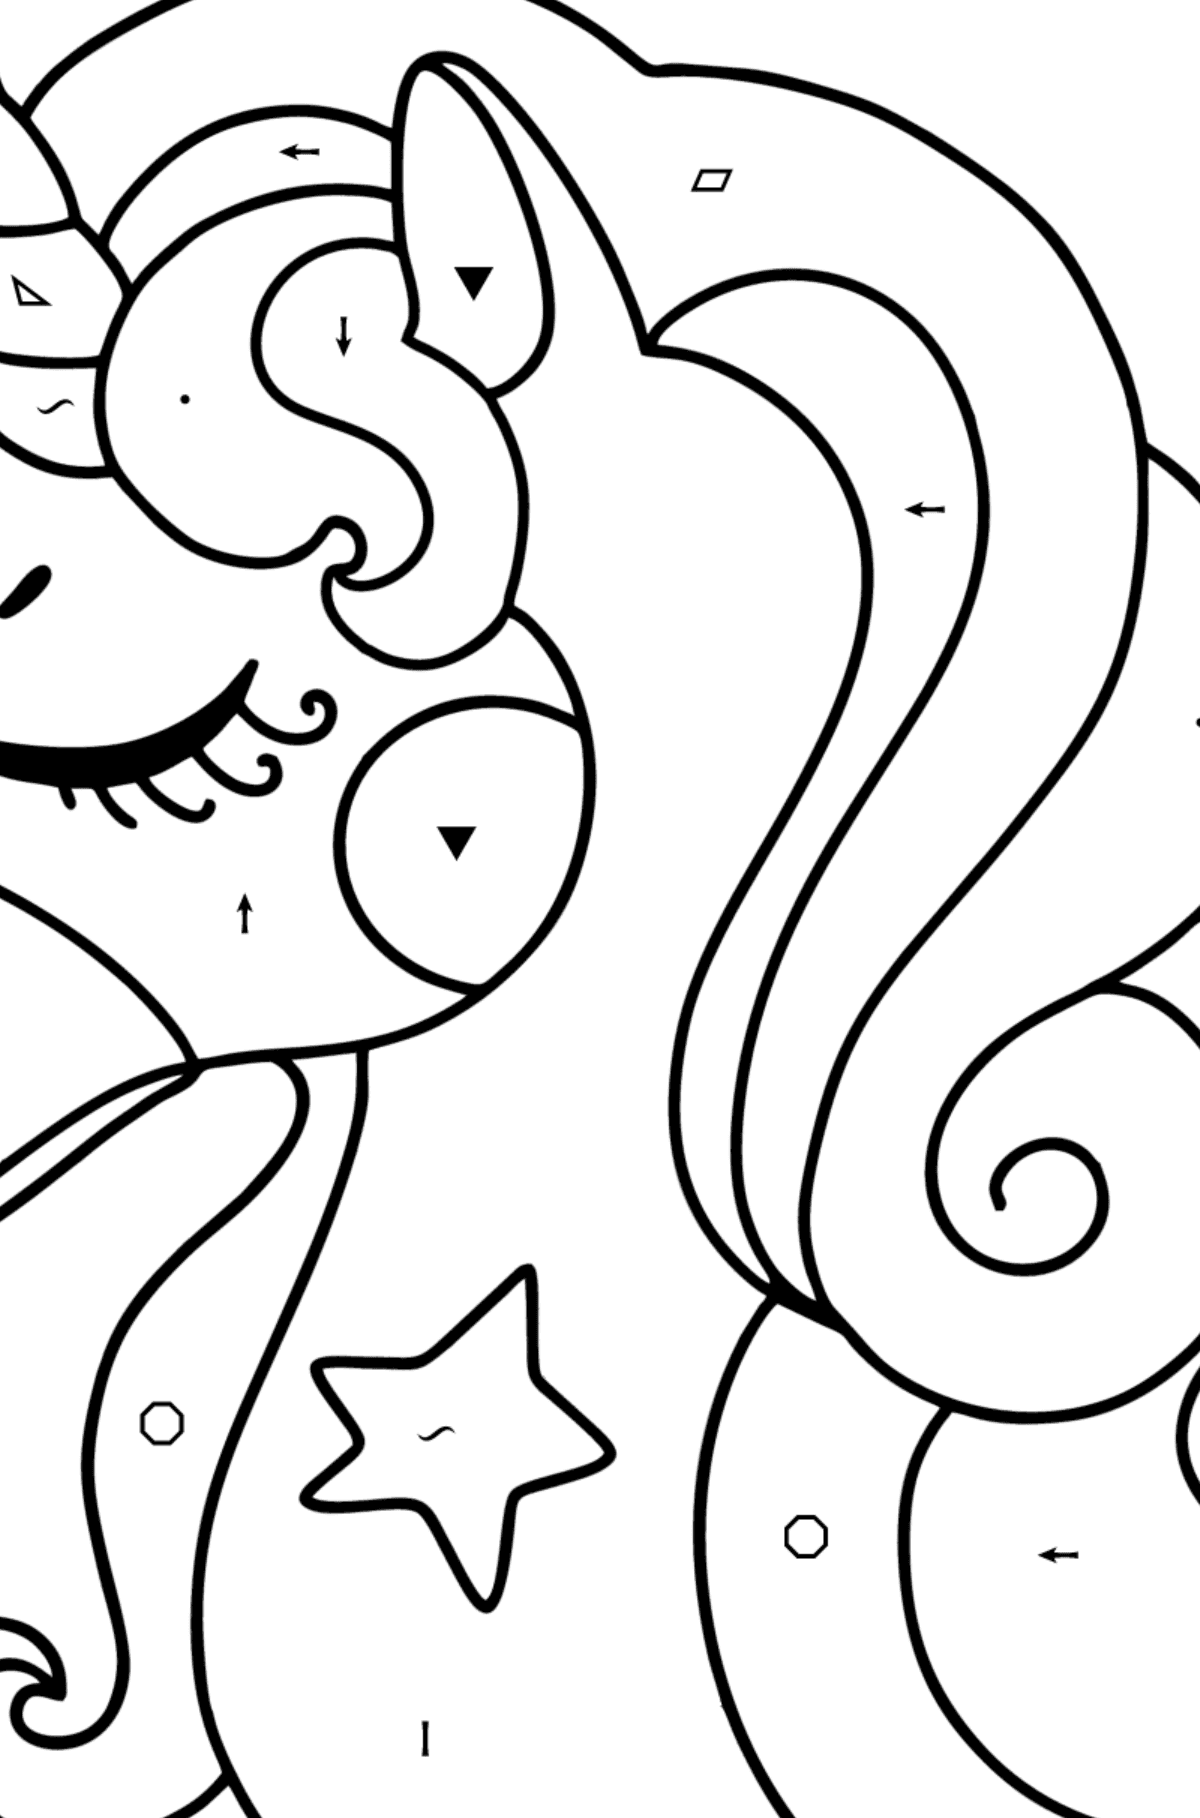 Unicorn head coloring page - Coloring by Symbols and Geometric Shapes for Kids